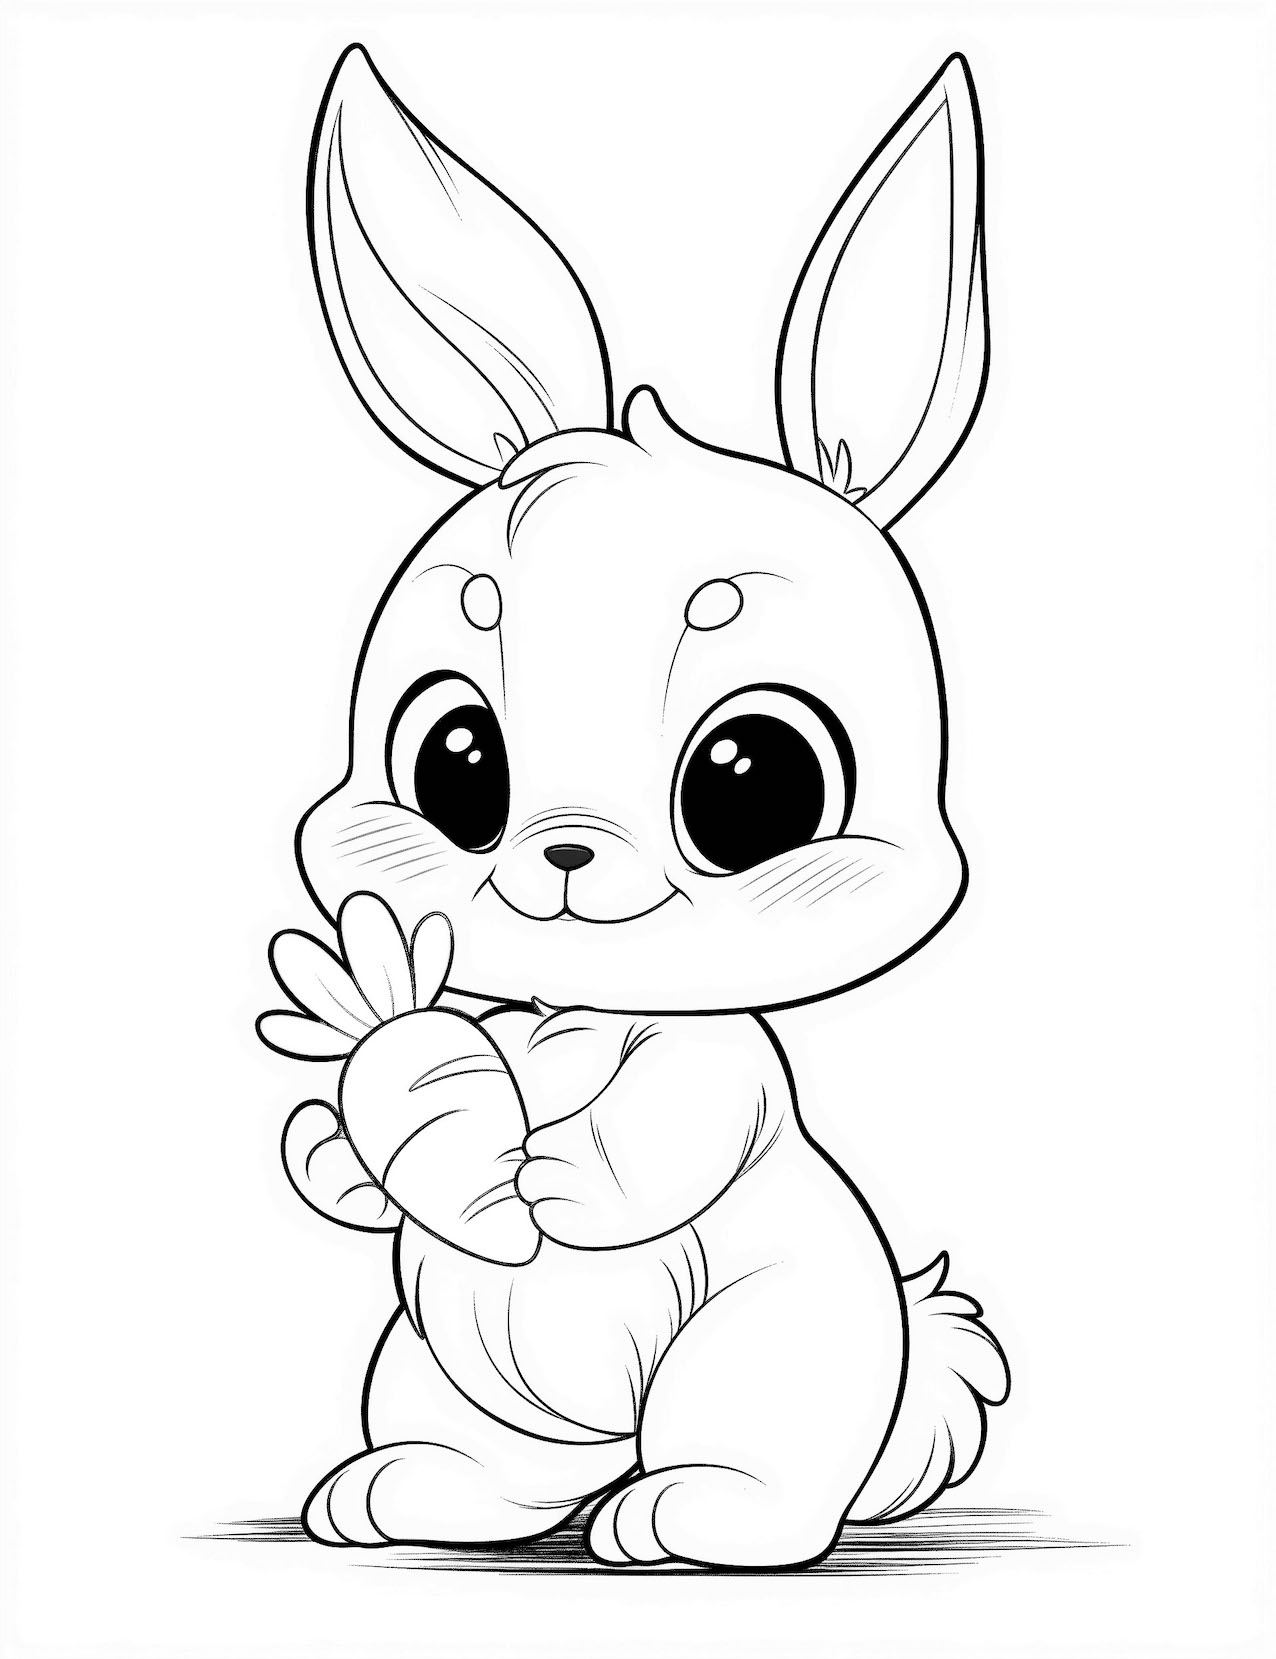 Cute bunny coloring pages for kids and adults